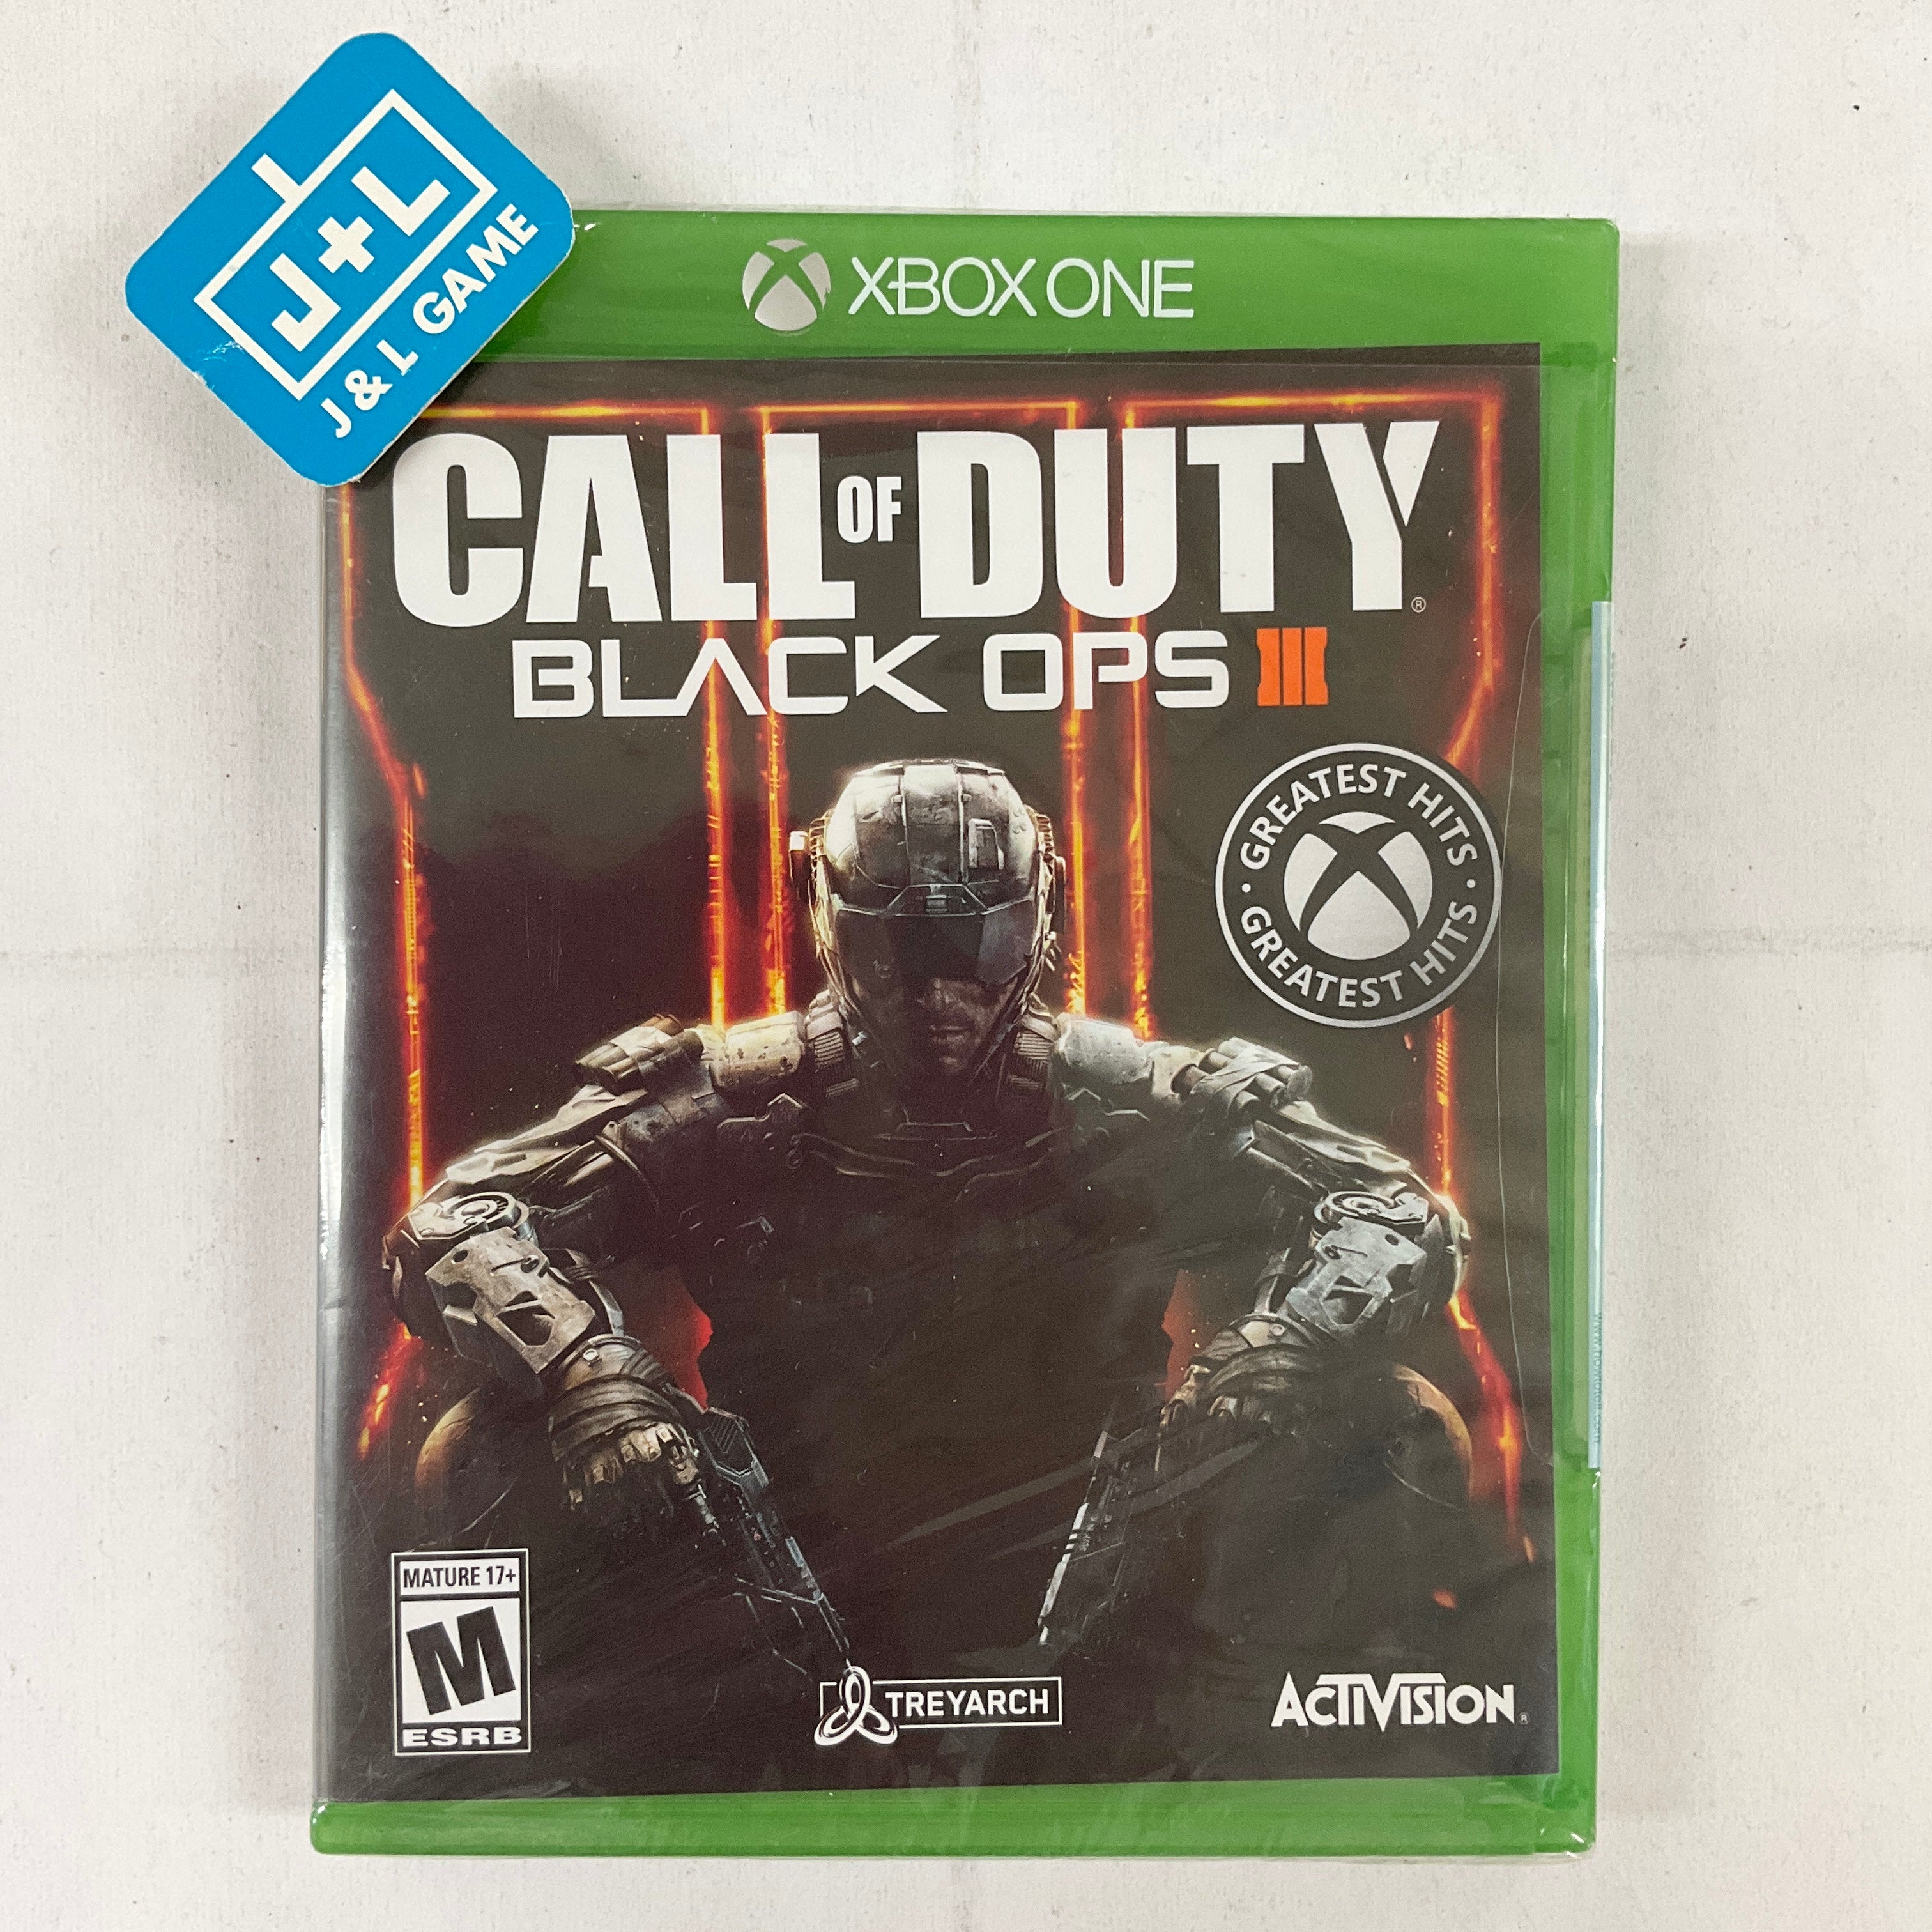 Call of Duty: Black Ops III - (XB1) Xbox One Video Games Activision   